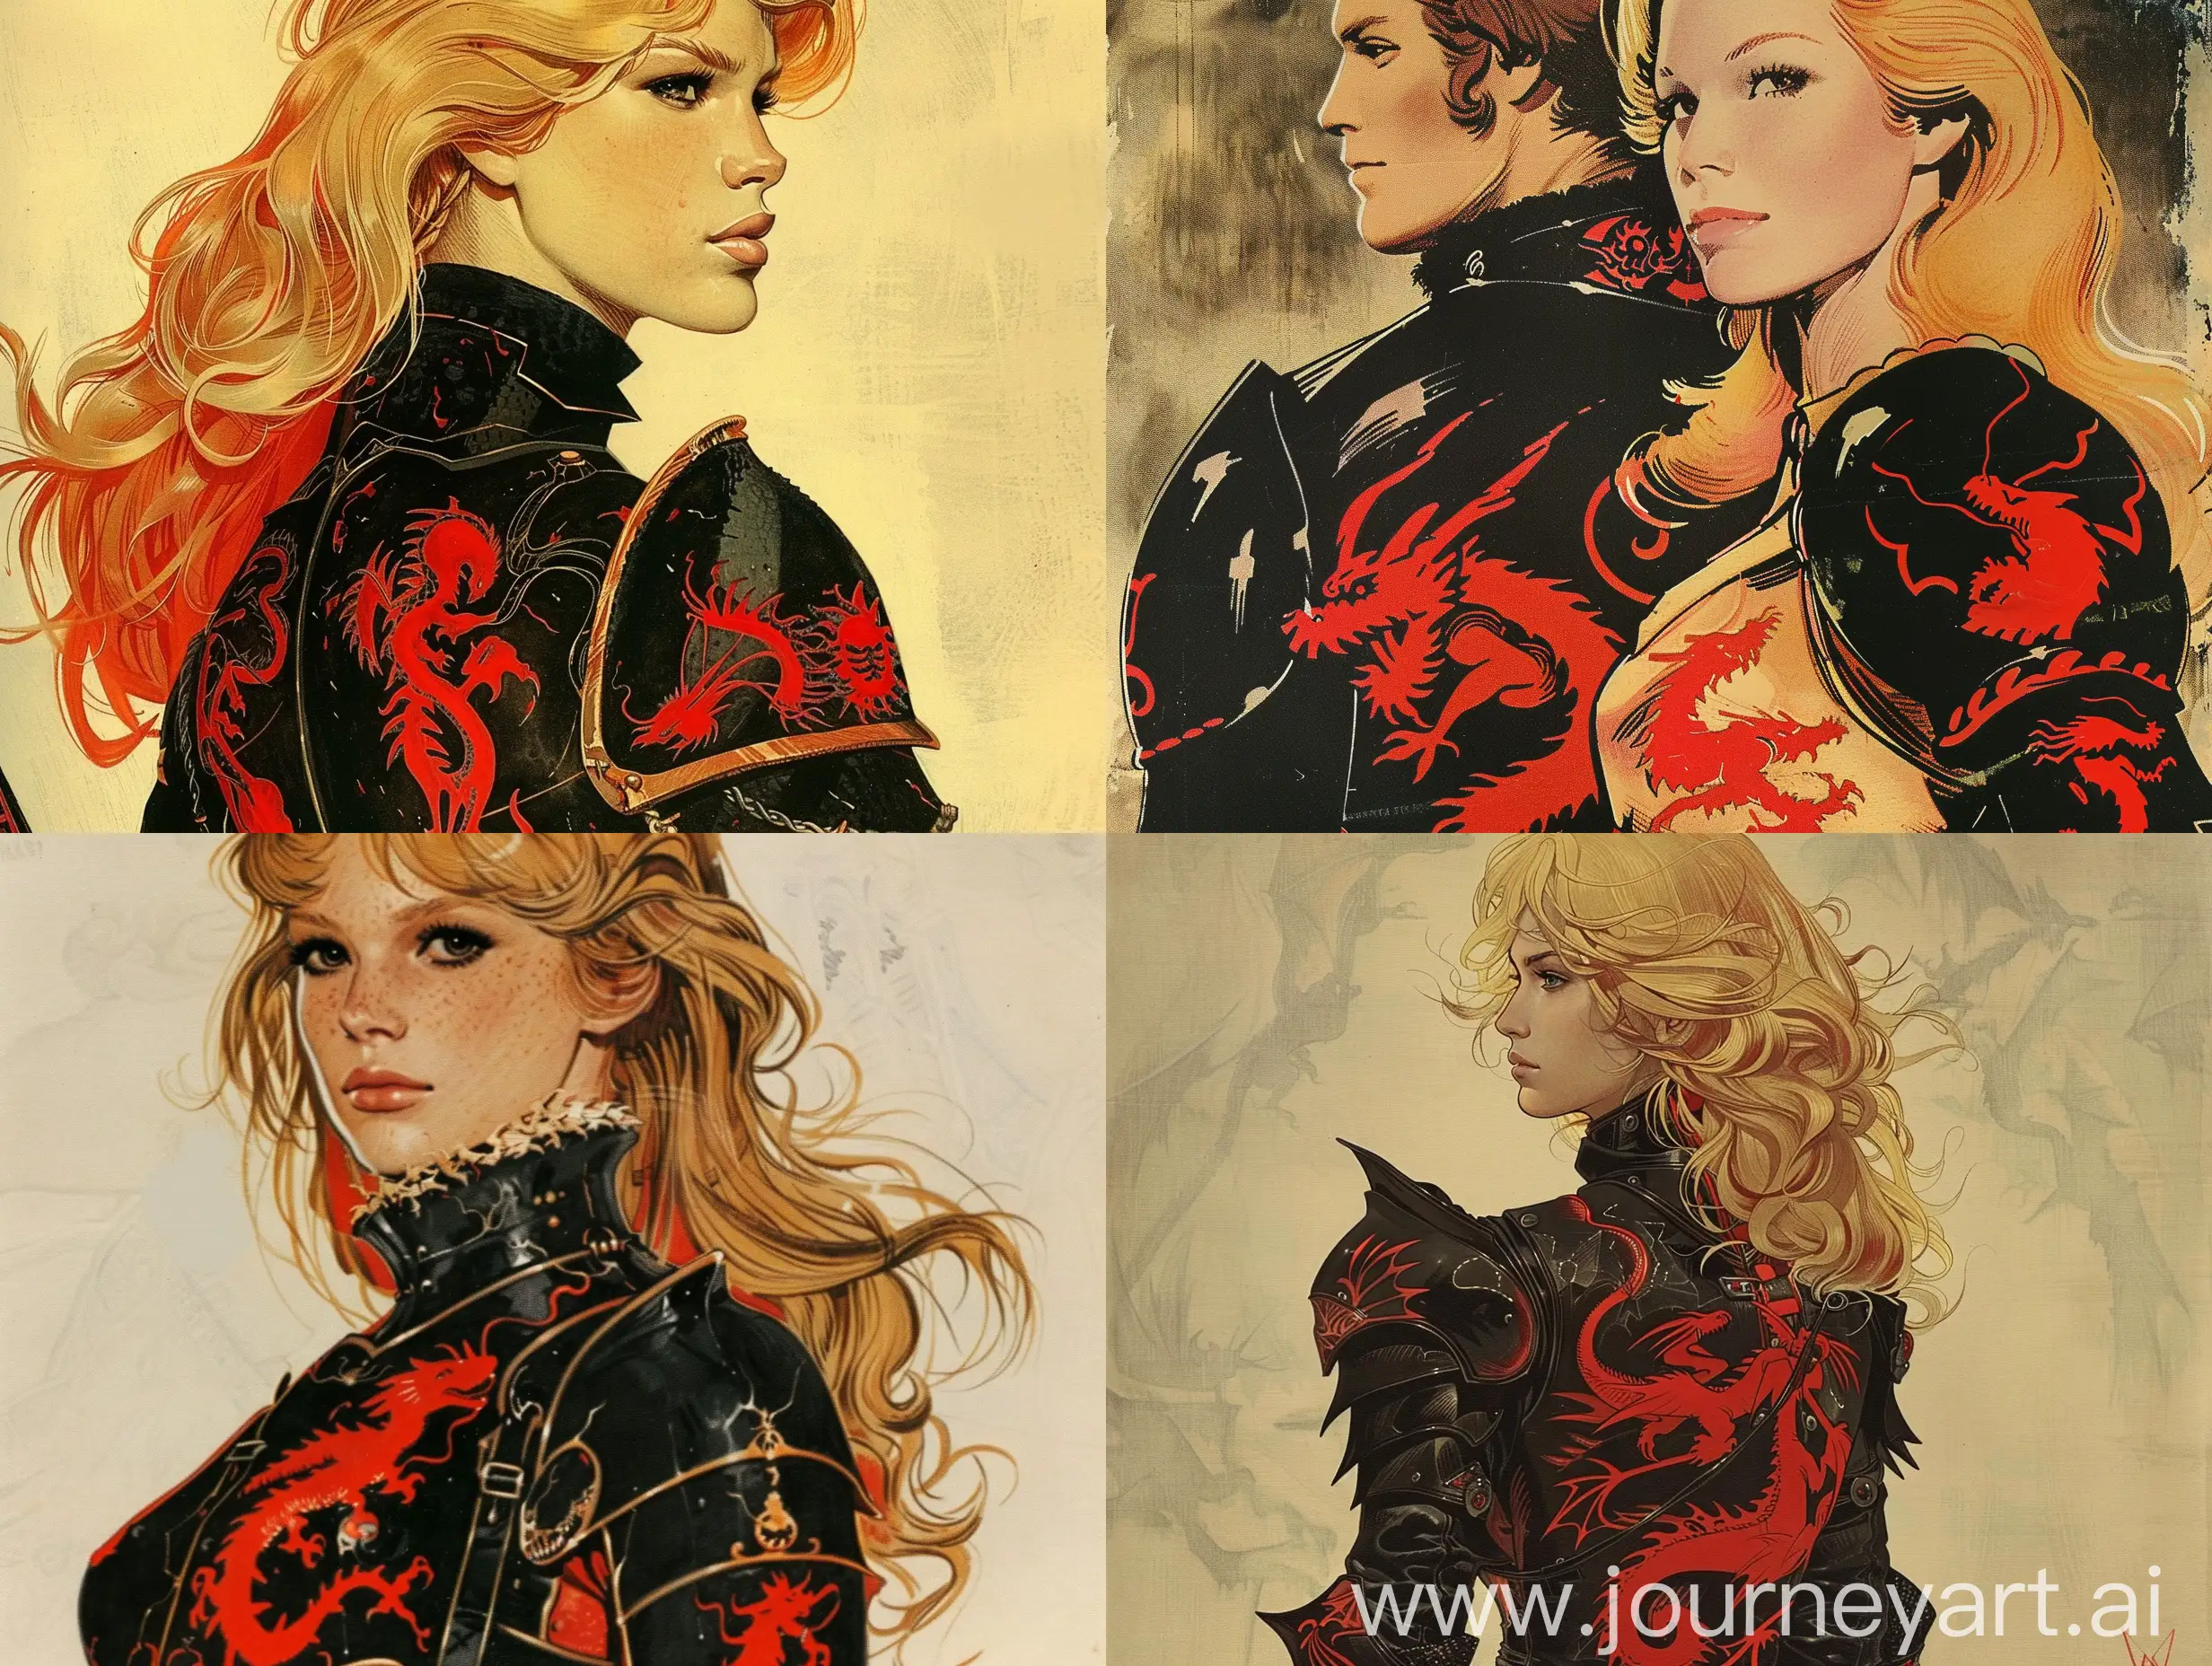 1970's art illustration from dark fantasy books (style). Art illustration of a woman with sun-blond hair, with red highlights. His armor is black with red designs illustrating dragons.